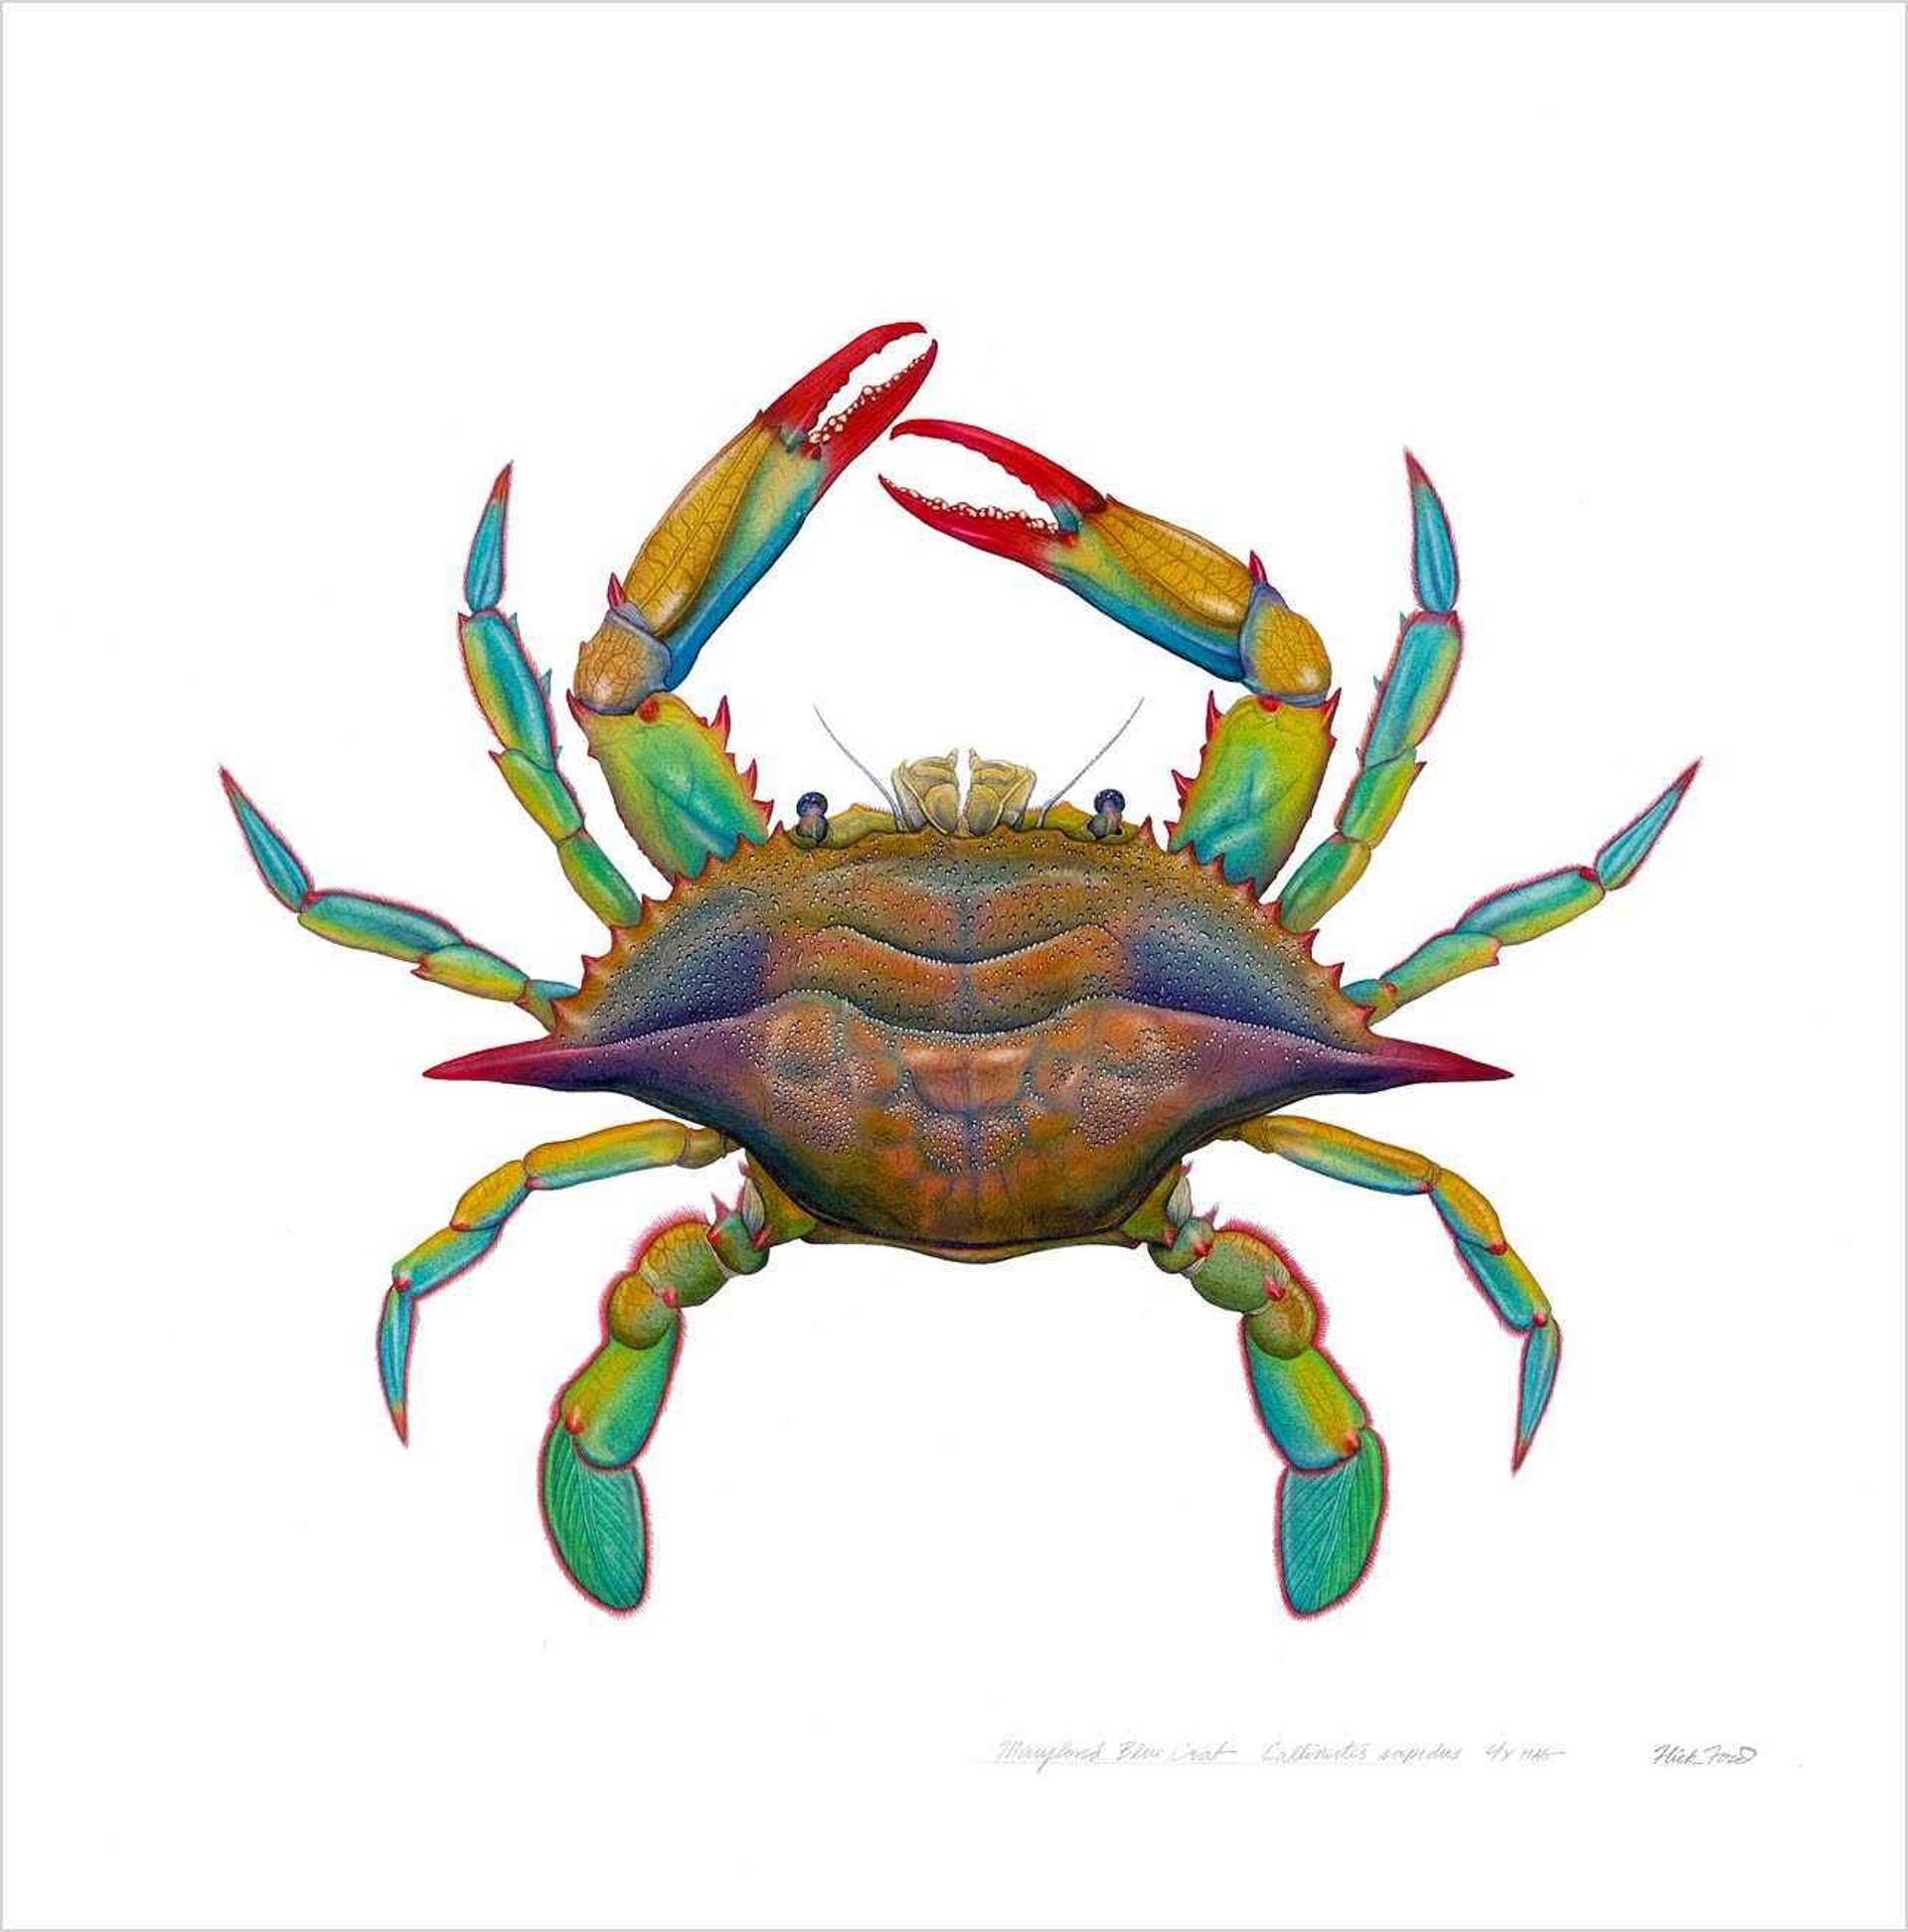 Maryland Blue Crab Callinectes sapidus 4X Mag by Flick Ford